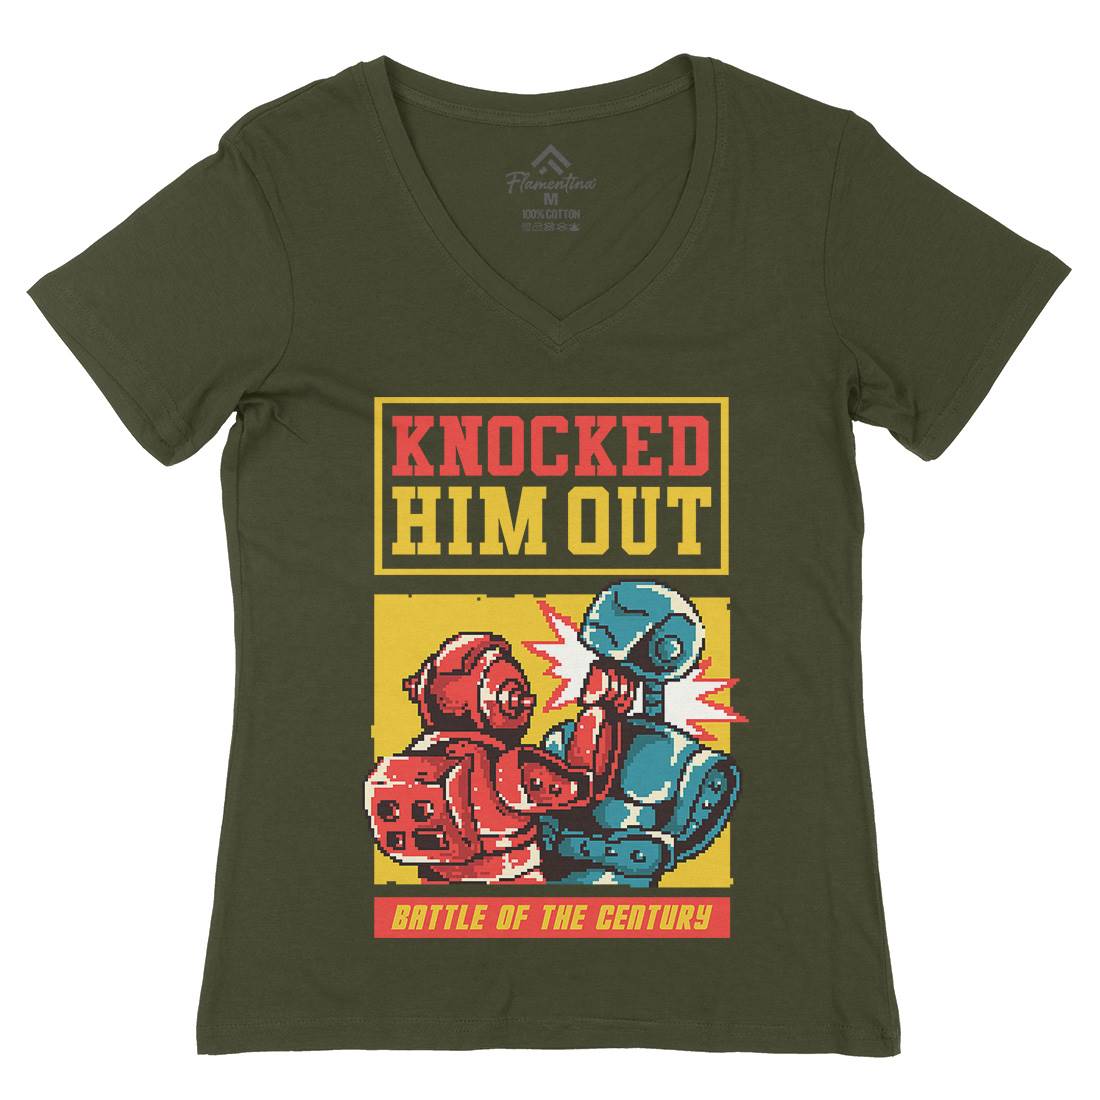 Knocked Him Out Womens Organic V-Neck T-Shirt Space B923